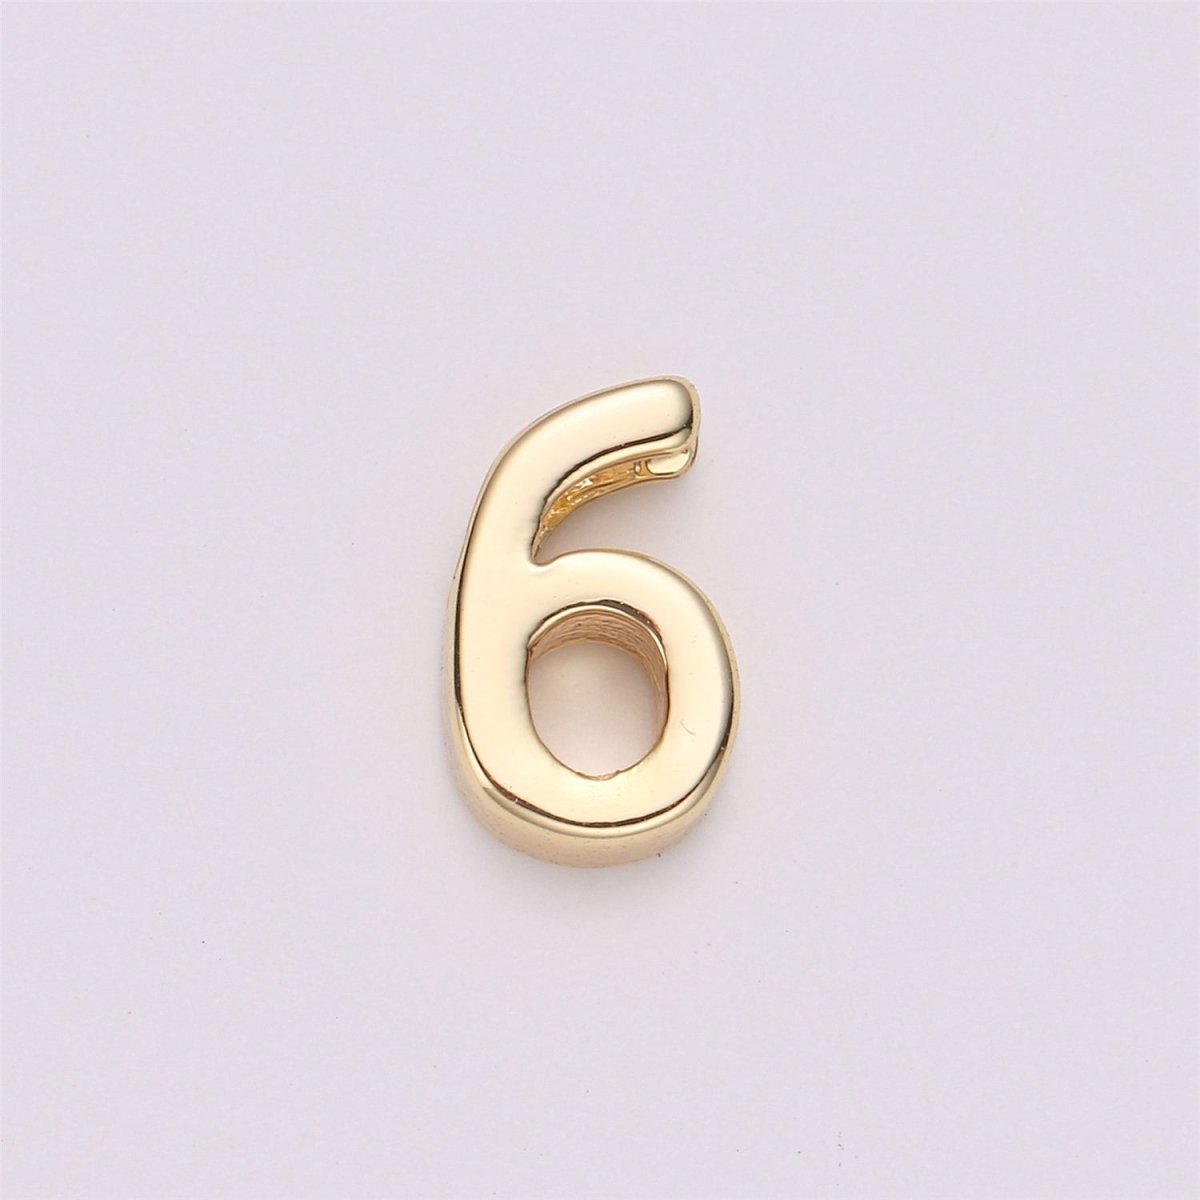 18k Gold Filled Number Charms With 1.5mm Open Sides, Lucky number set for necklace jewelry bracelet making Supply Slide Letter Pendant - DLUXCA